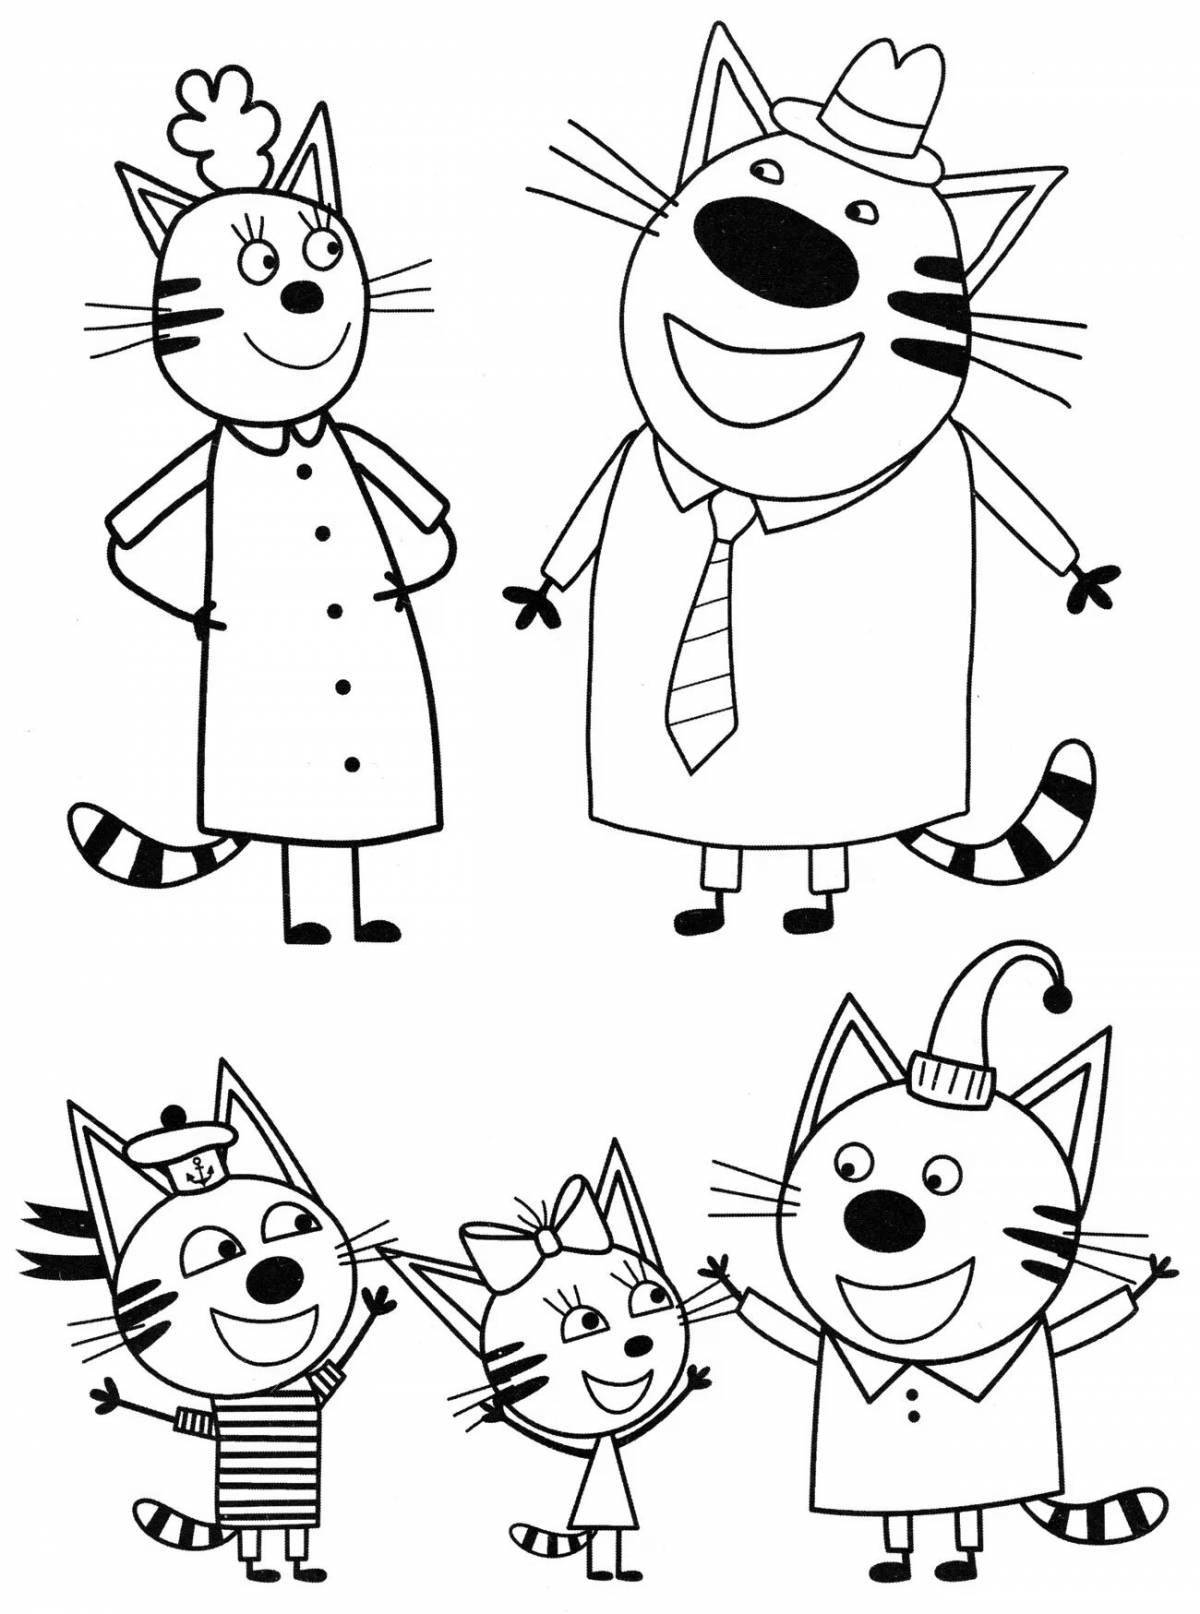 Adorable three cats coloring book for kids